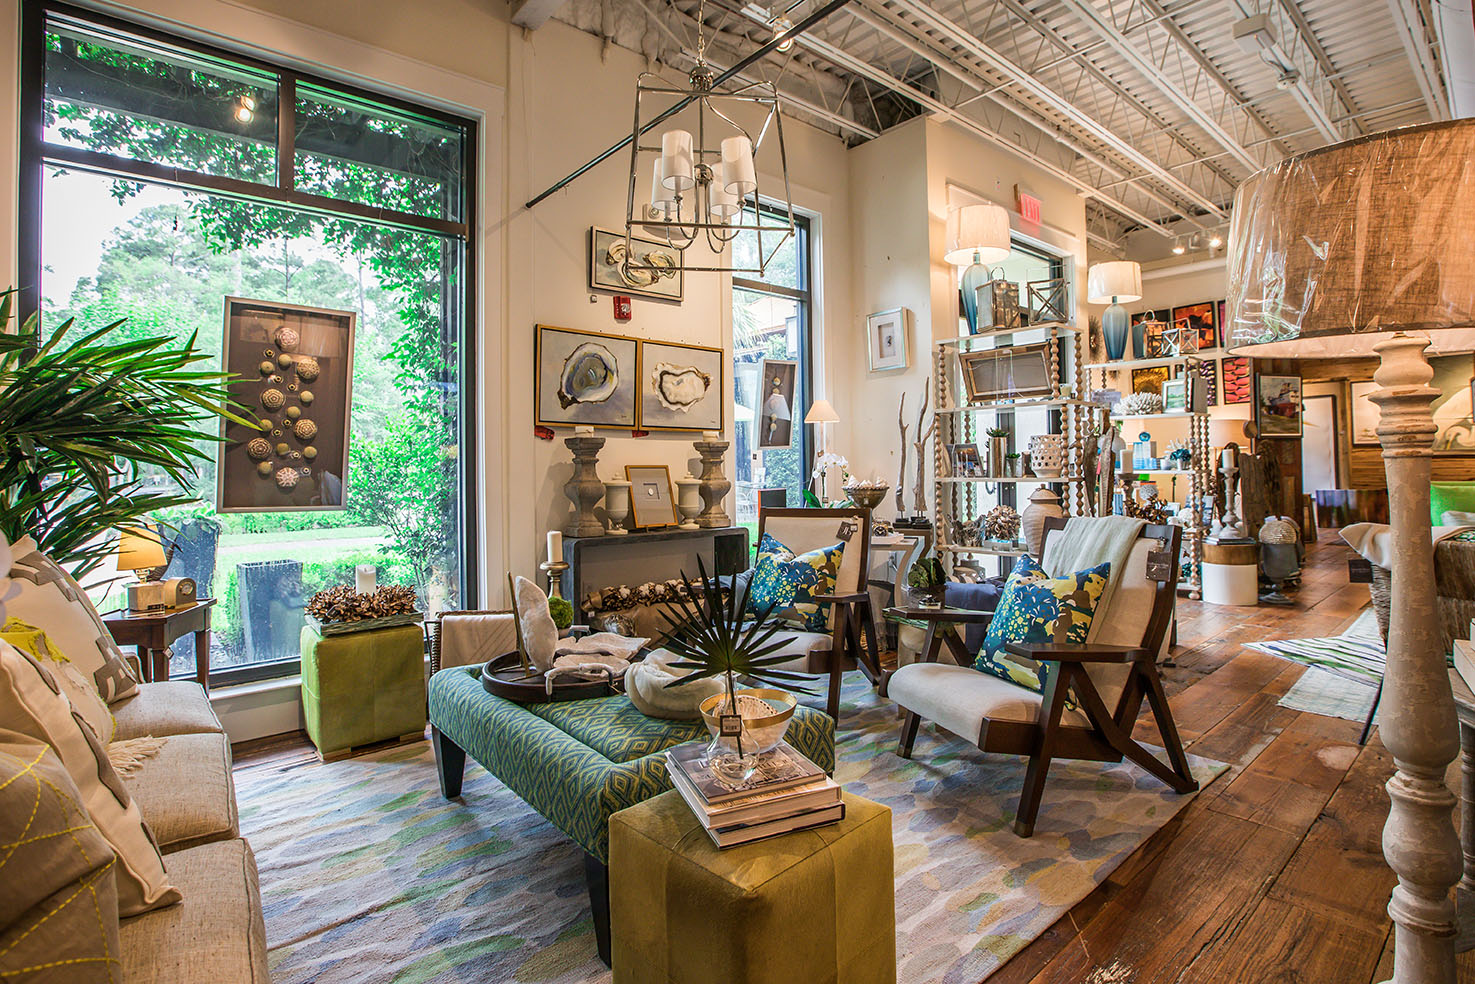 shopping hilton head island includes the retail space by j banks design group filled with grifts and decor items